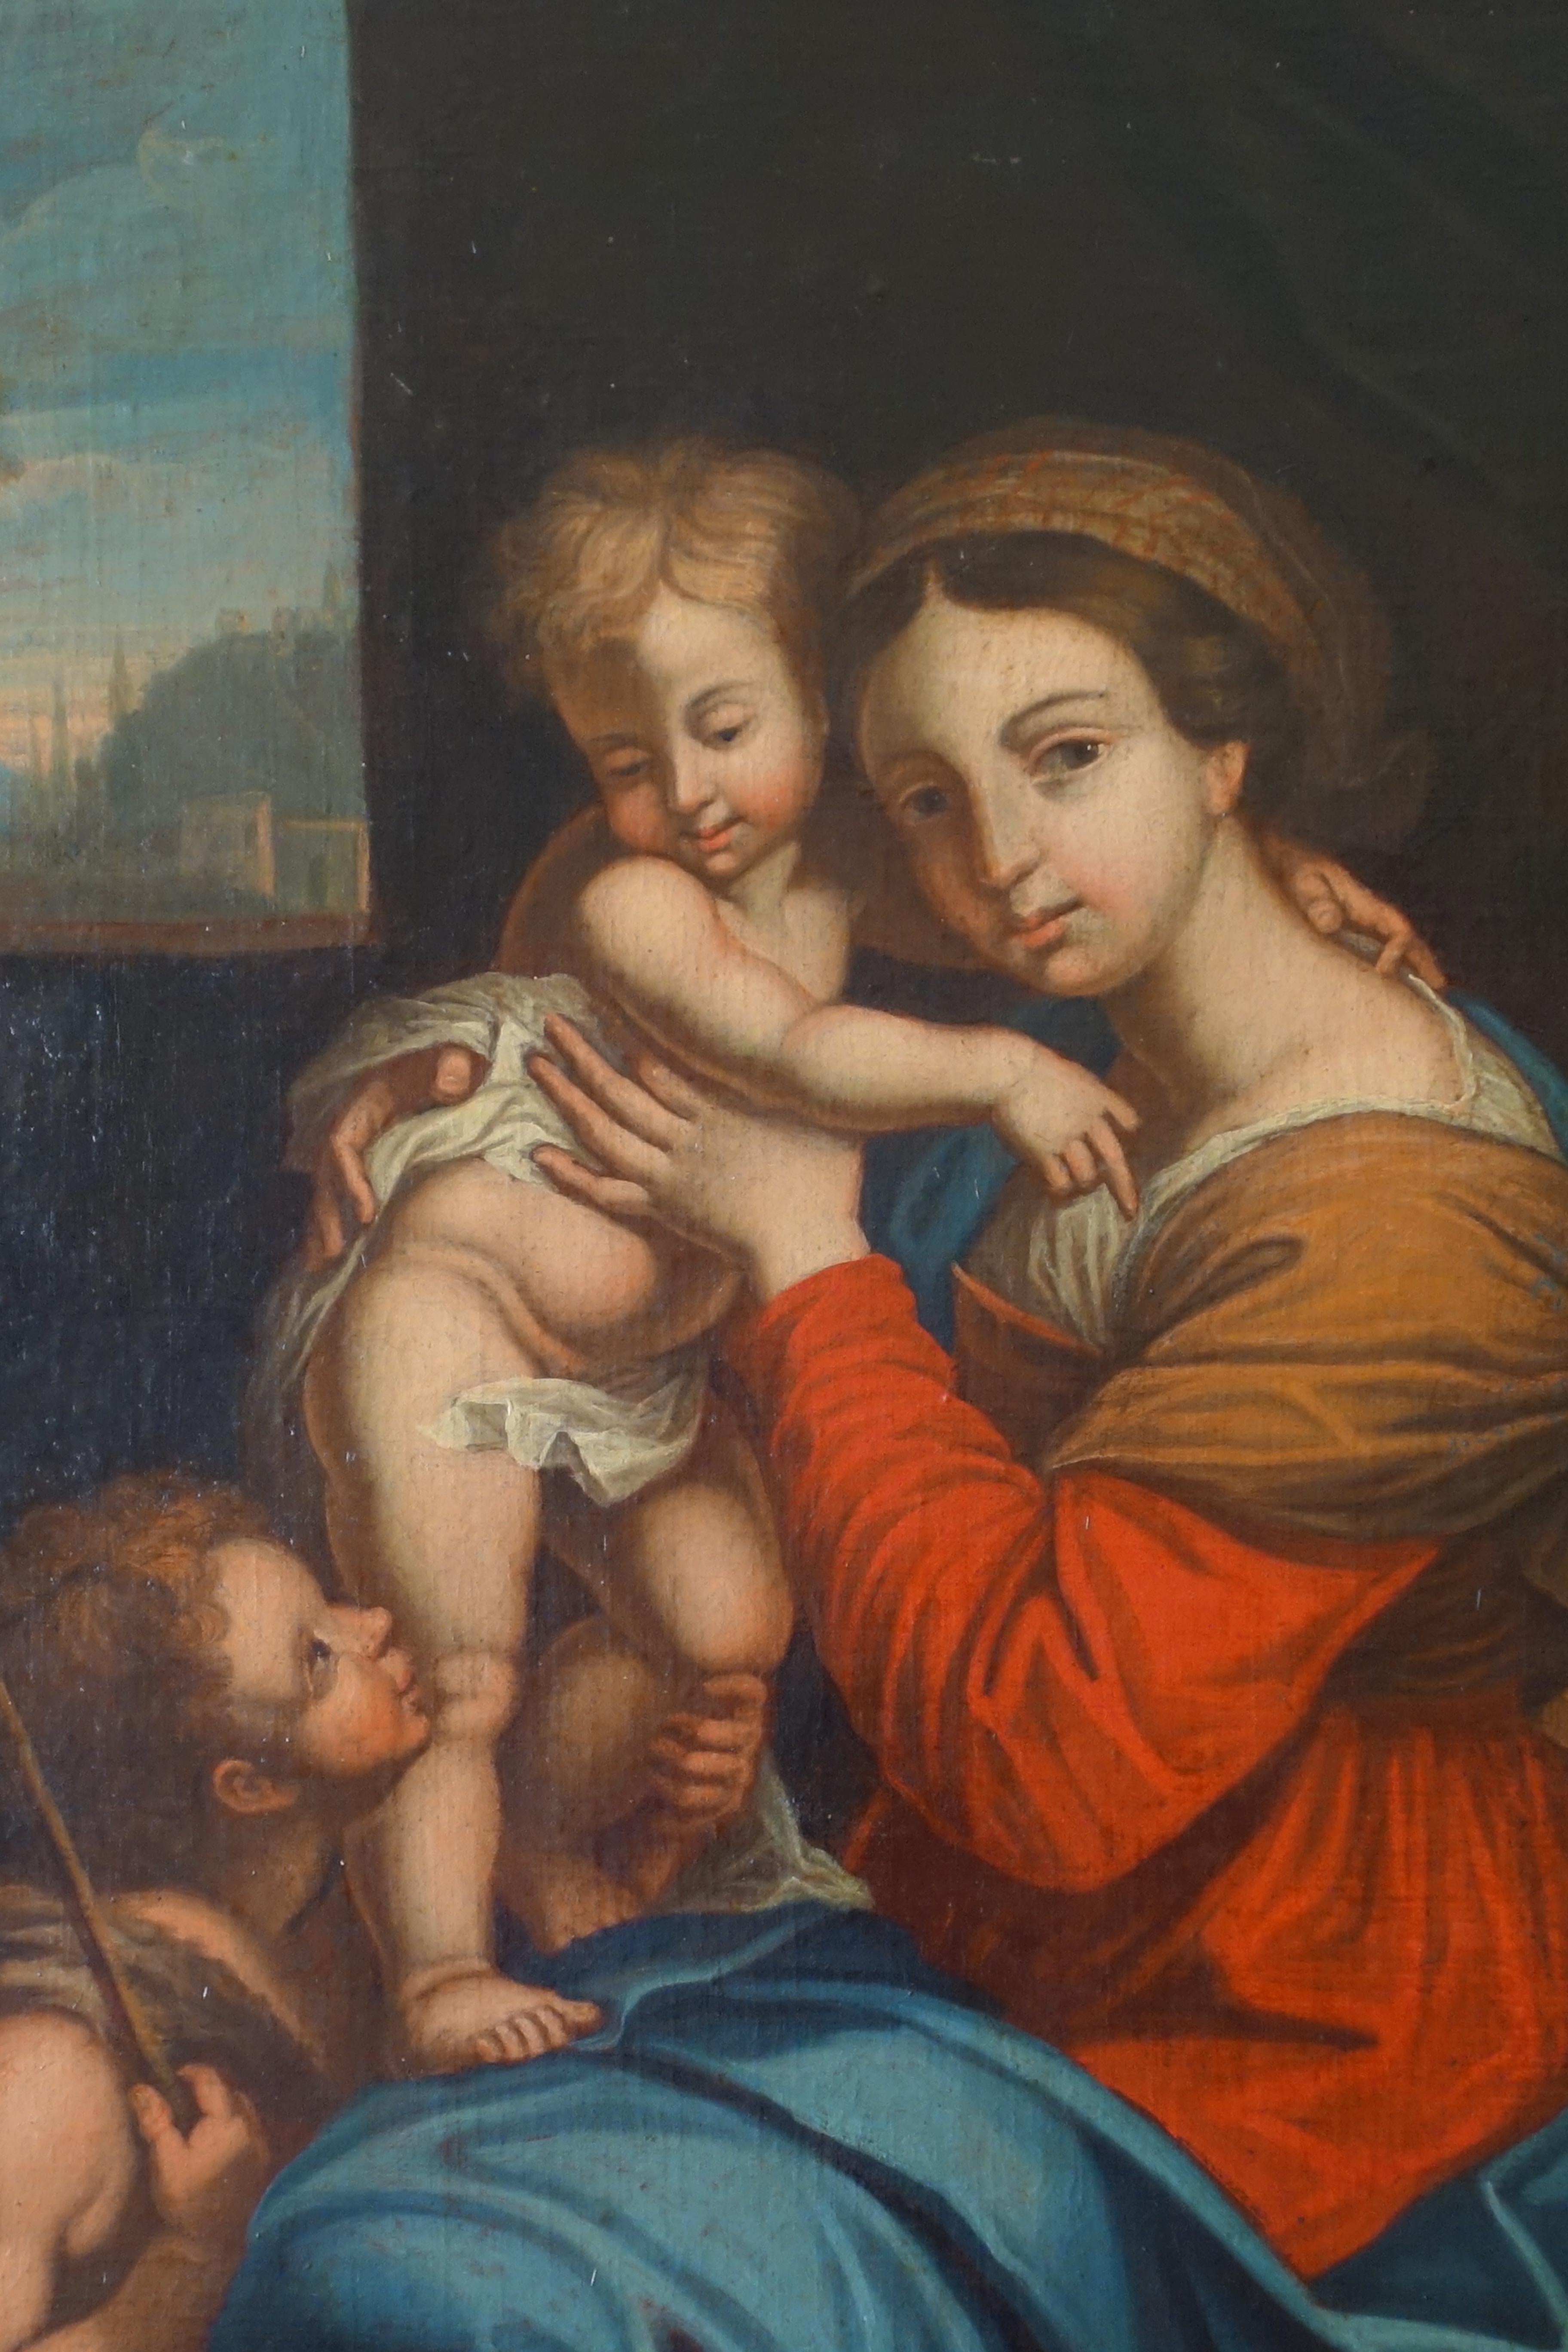 Late 18th century or early 19th century French school, antique painting featuring the Virgin Mary holding Jesus Child, Saint John the Baptist around.
Our work has been painted using the configuration of famous Madonna of the Chair by Italian master